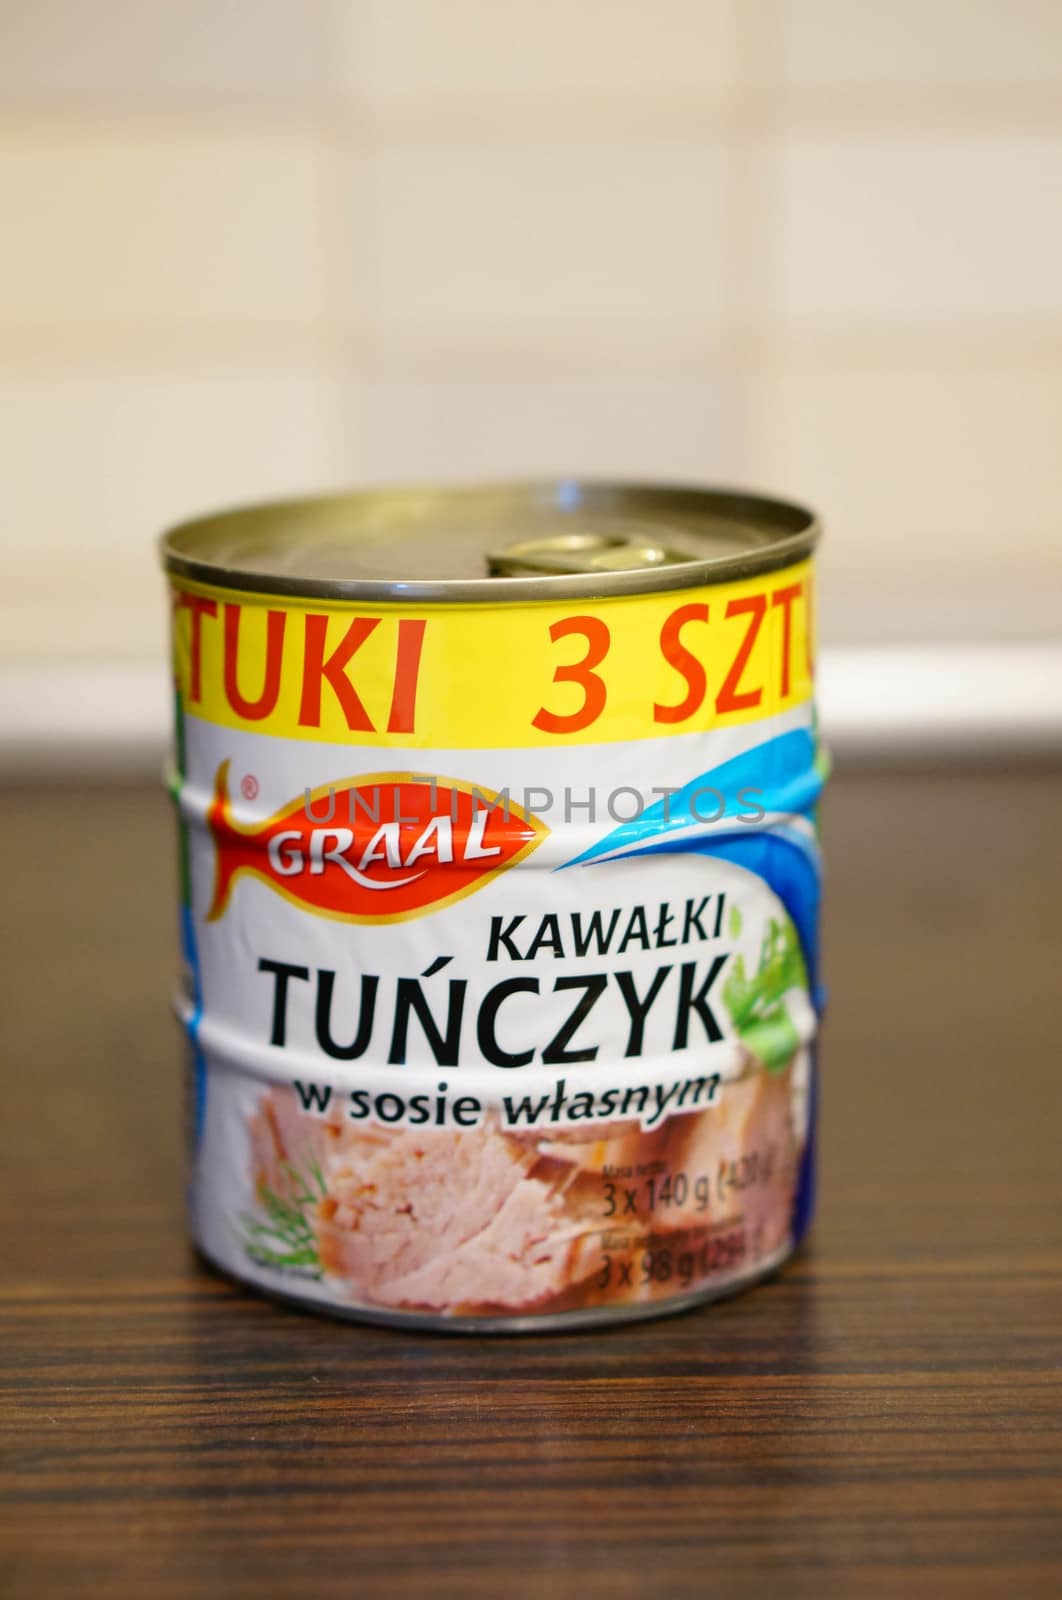 POZNAN, POLAND - SEPTEMBER 24, 2015: Graal tuna fish in cans